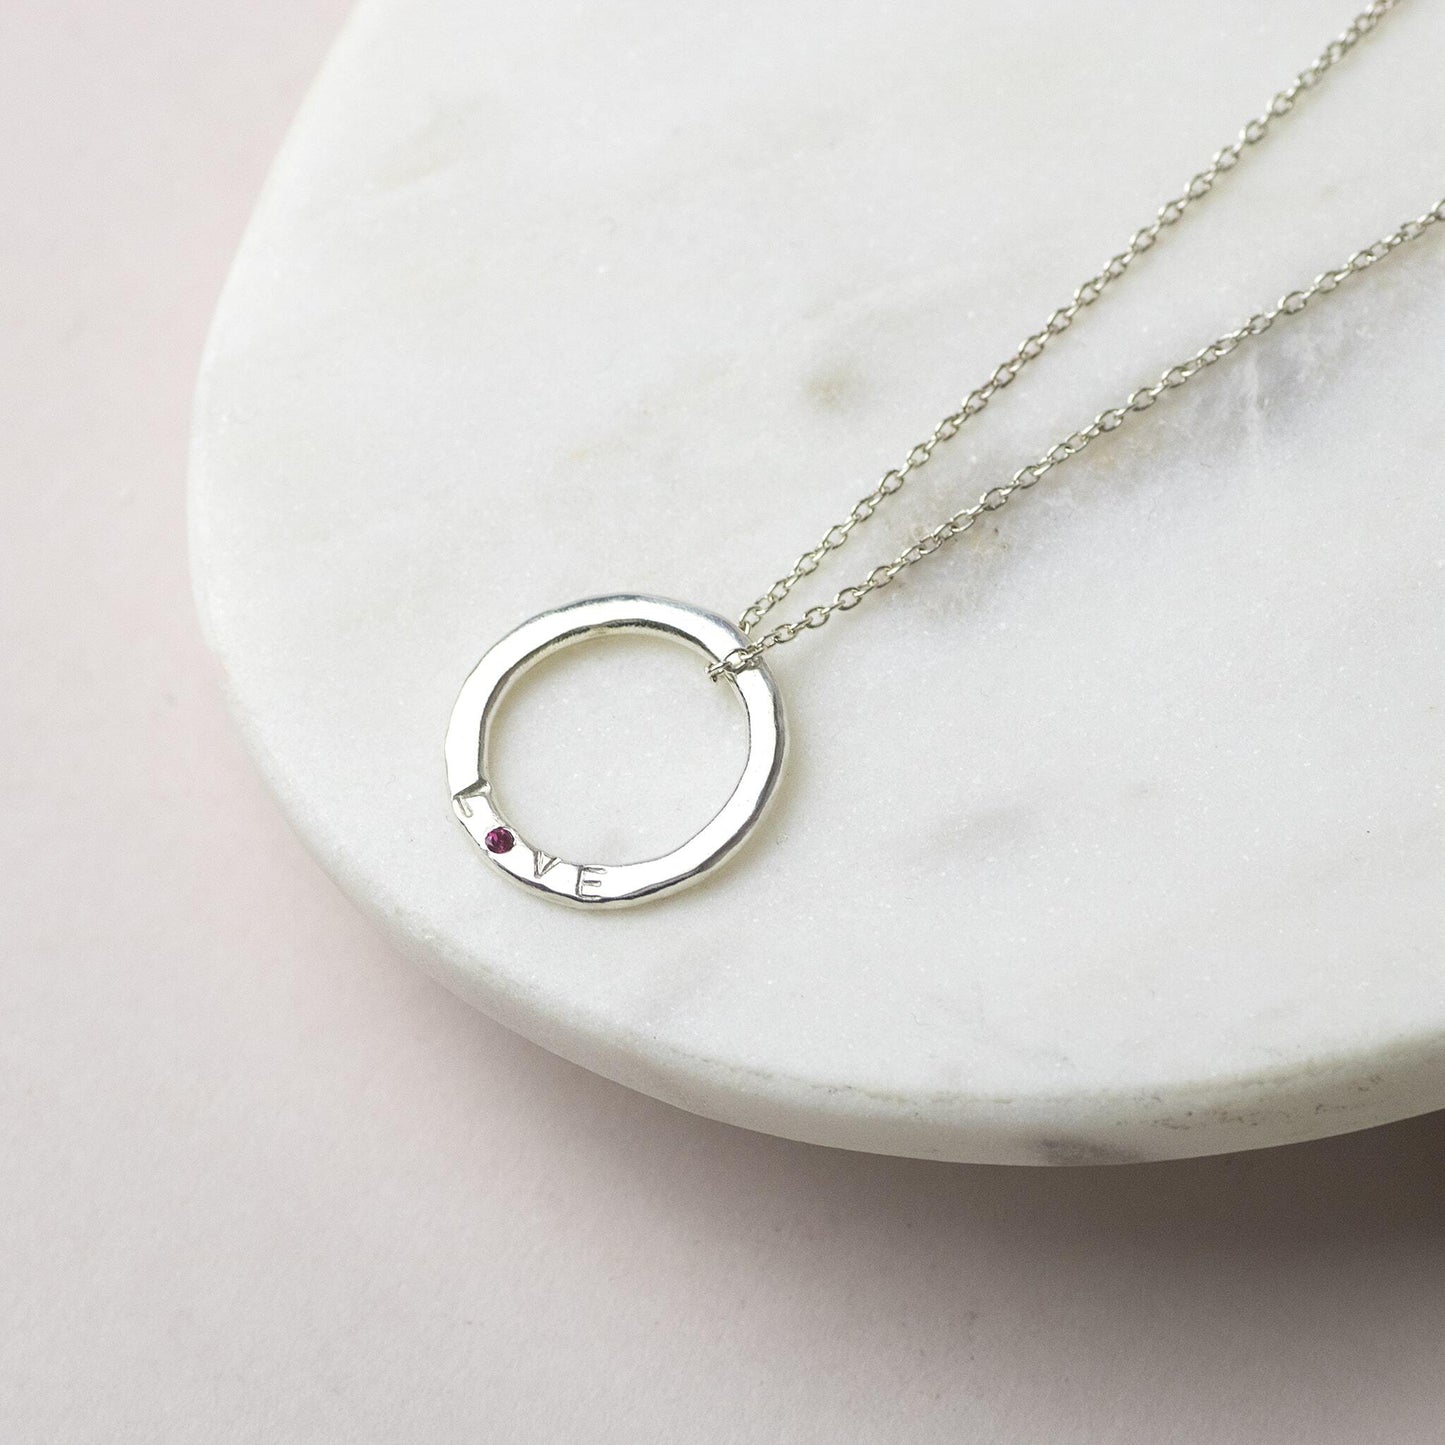 Silver Love Necklace with Birthstone - Gift for Loved One